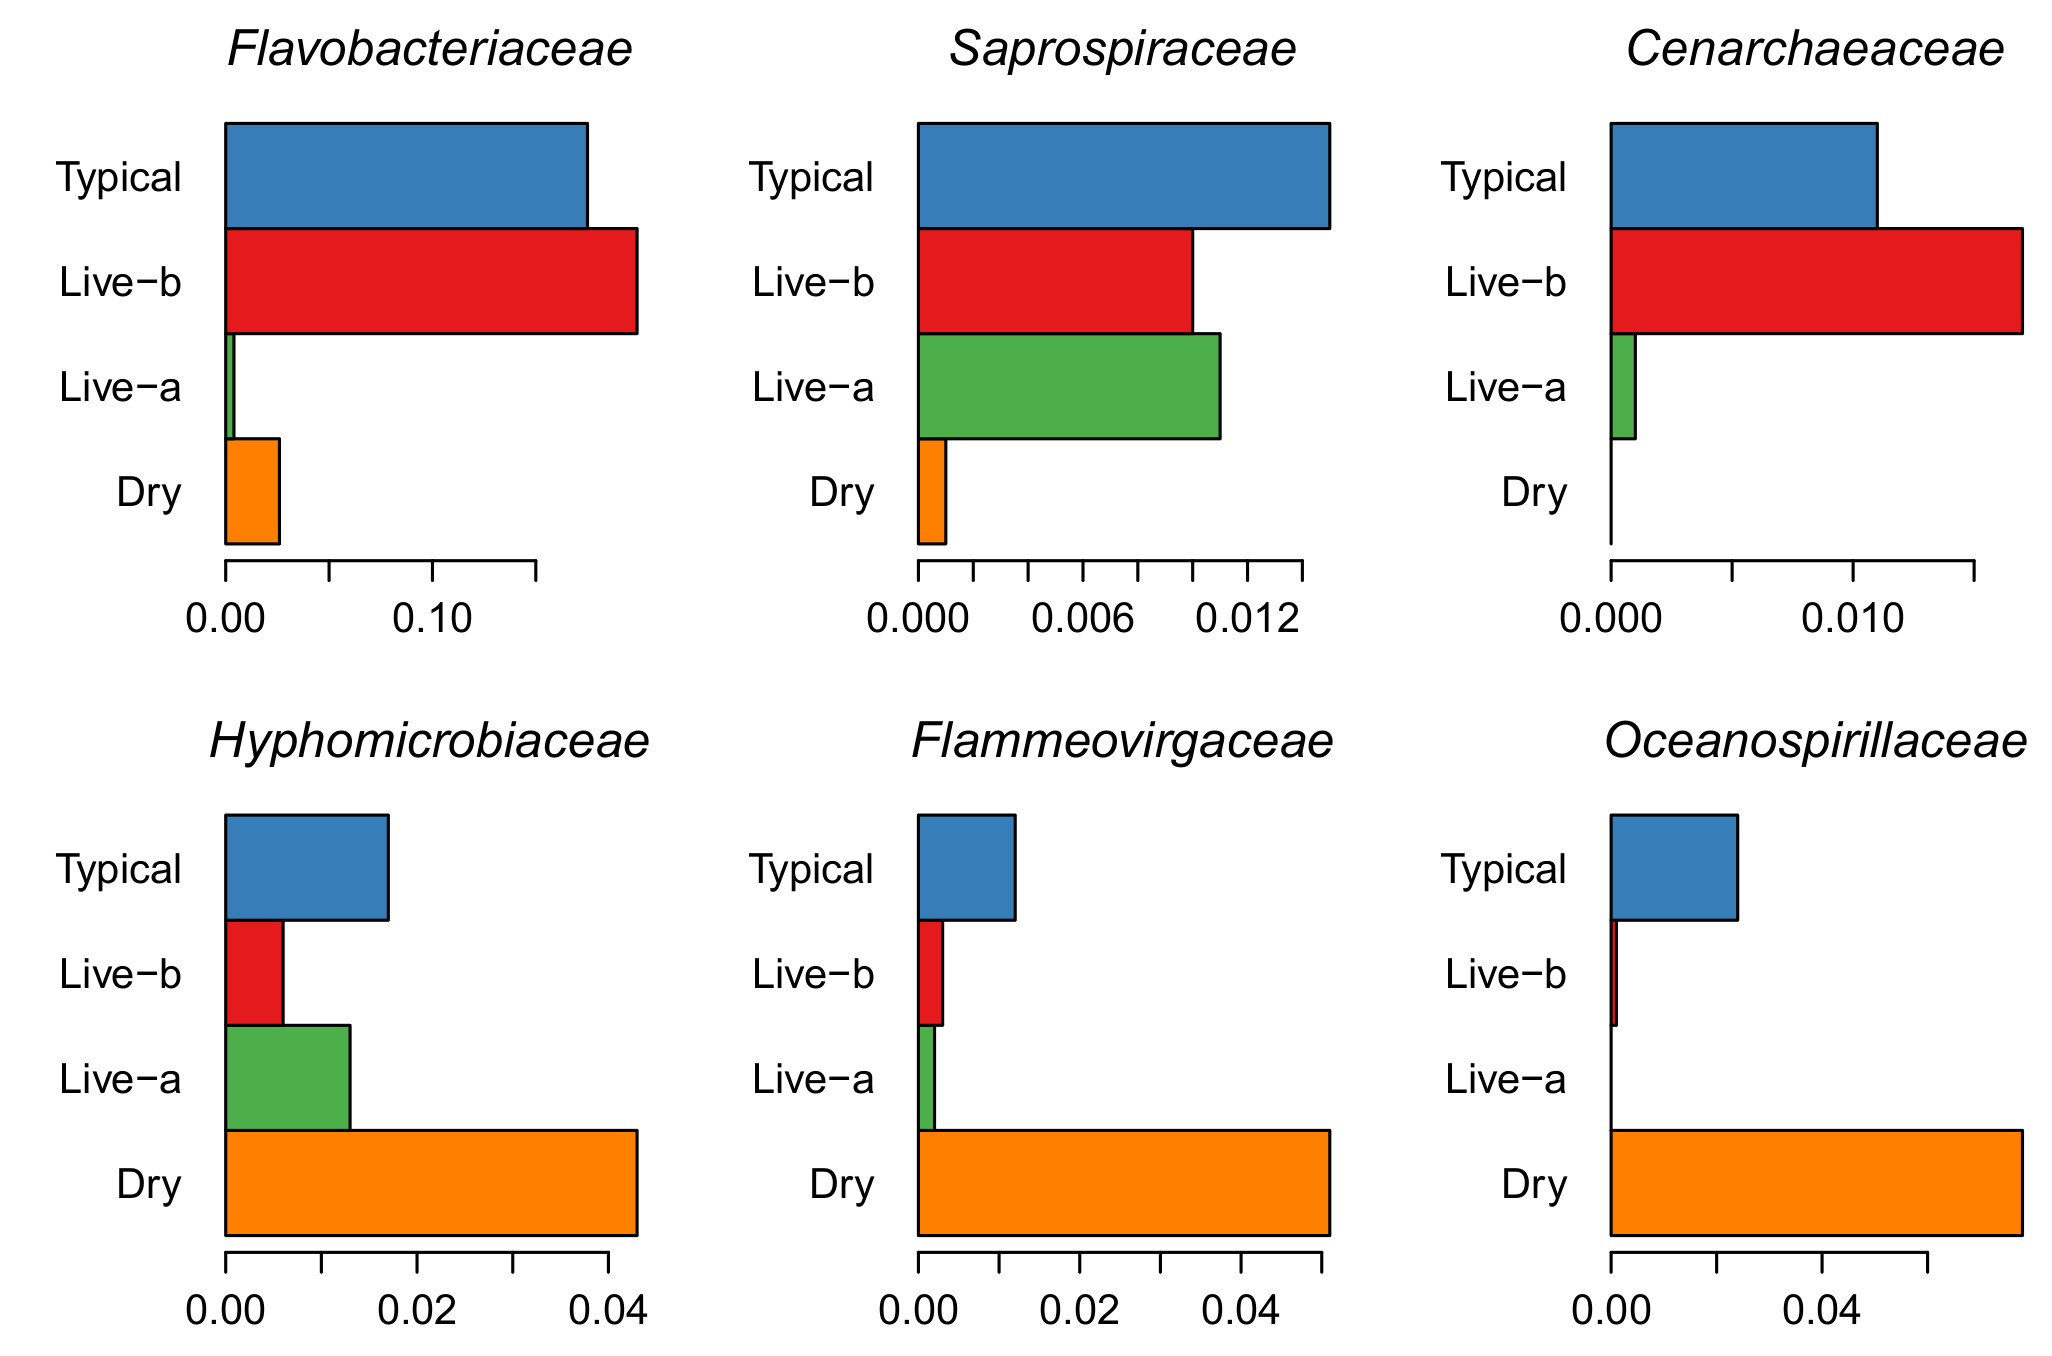 Figure 4: Examples of differences in the levels of core microbial families between tanks started with live rock or dry rock.